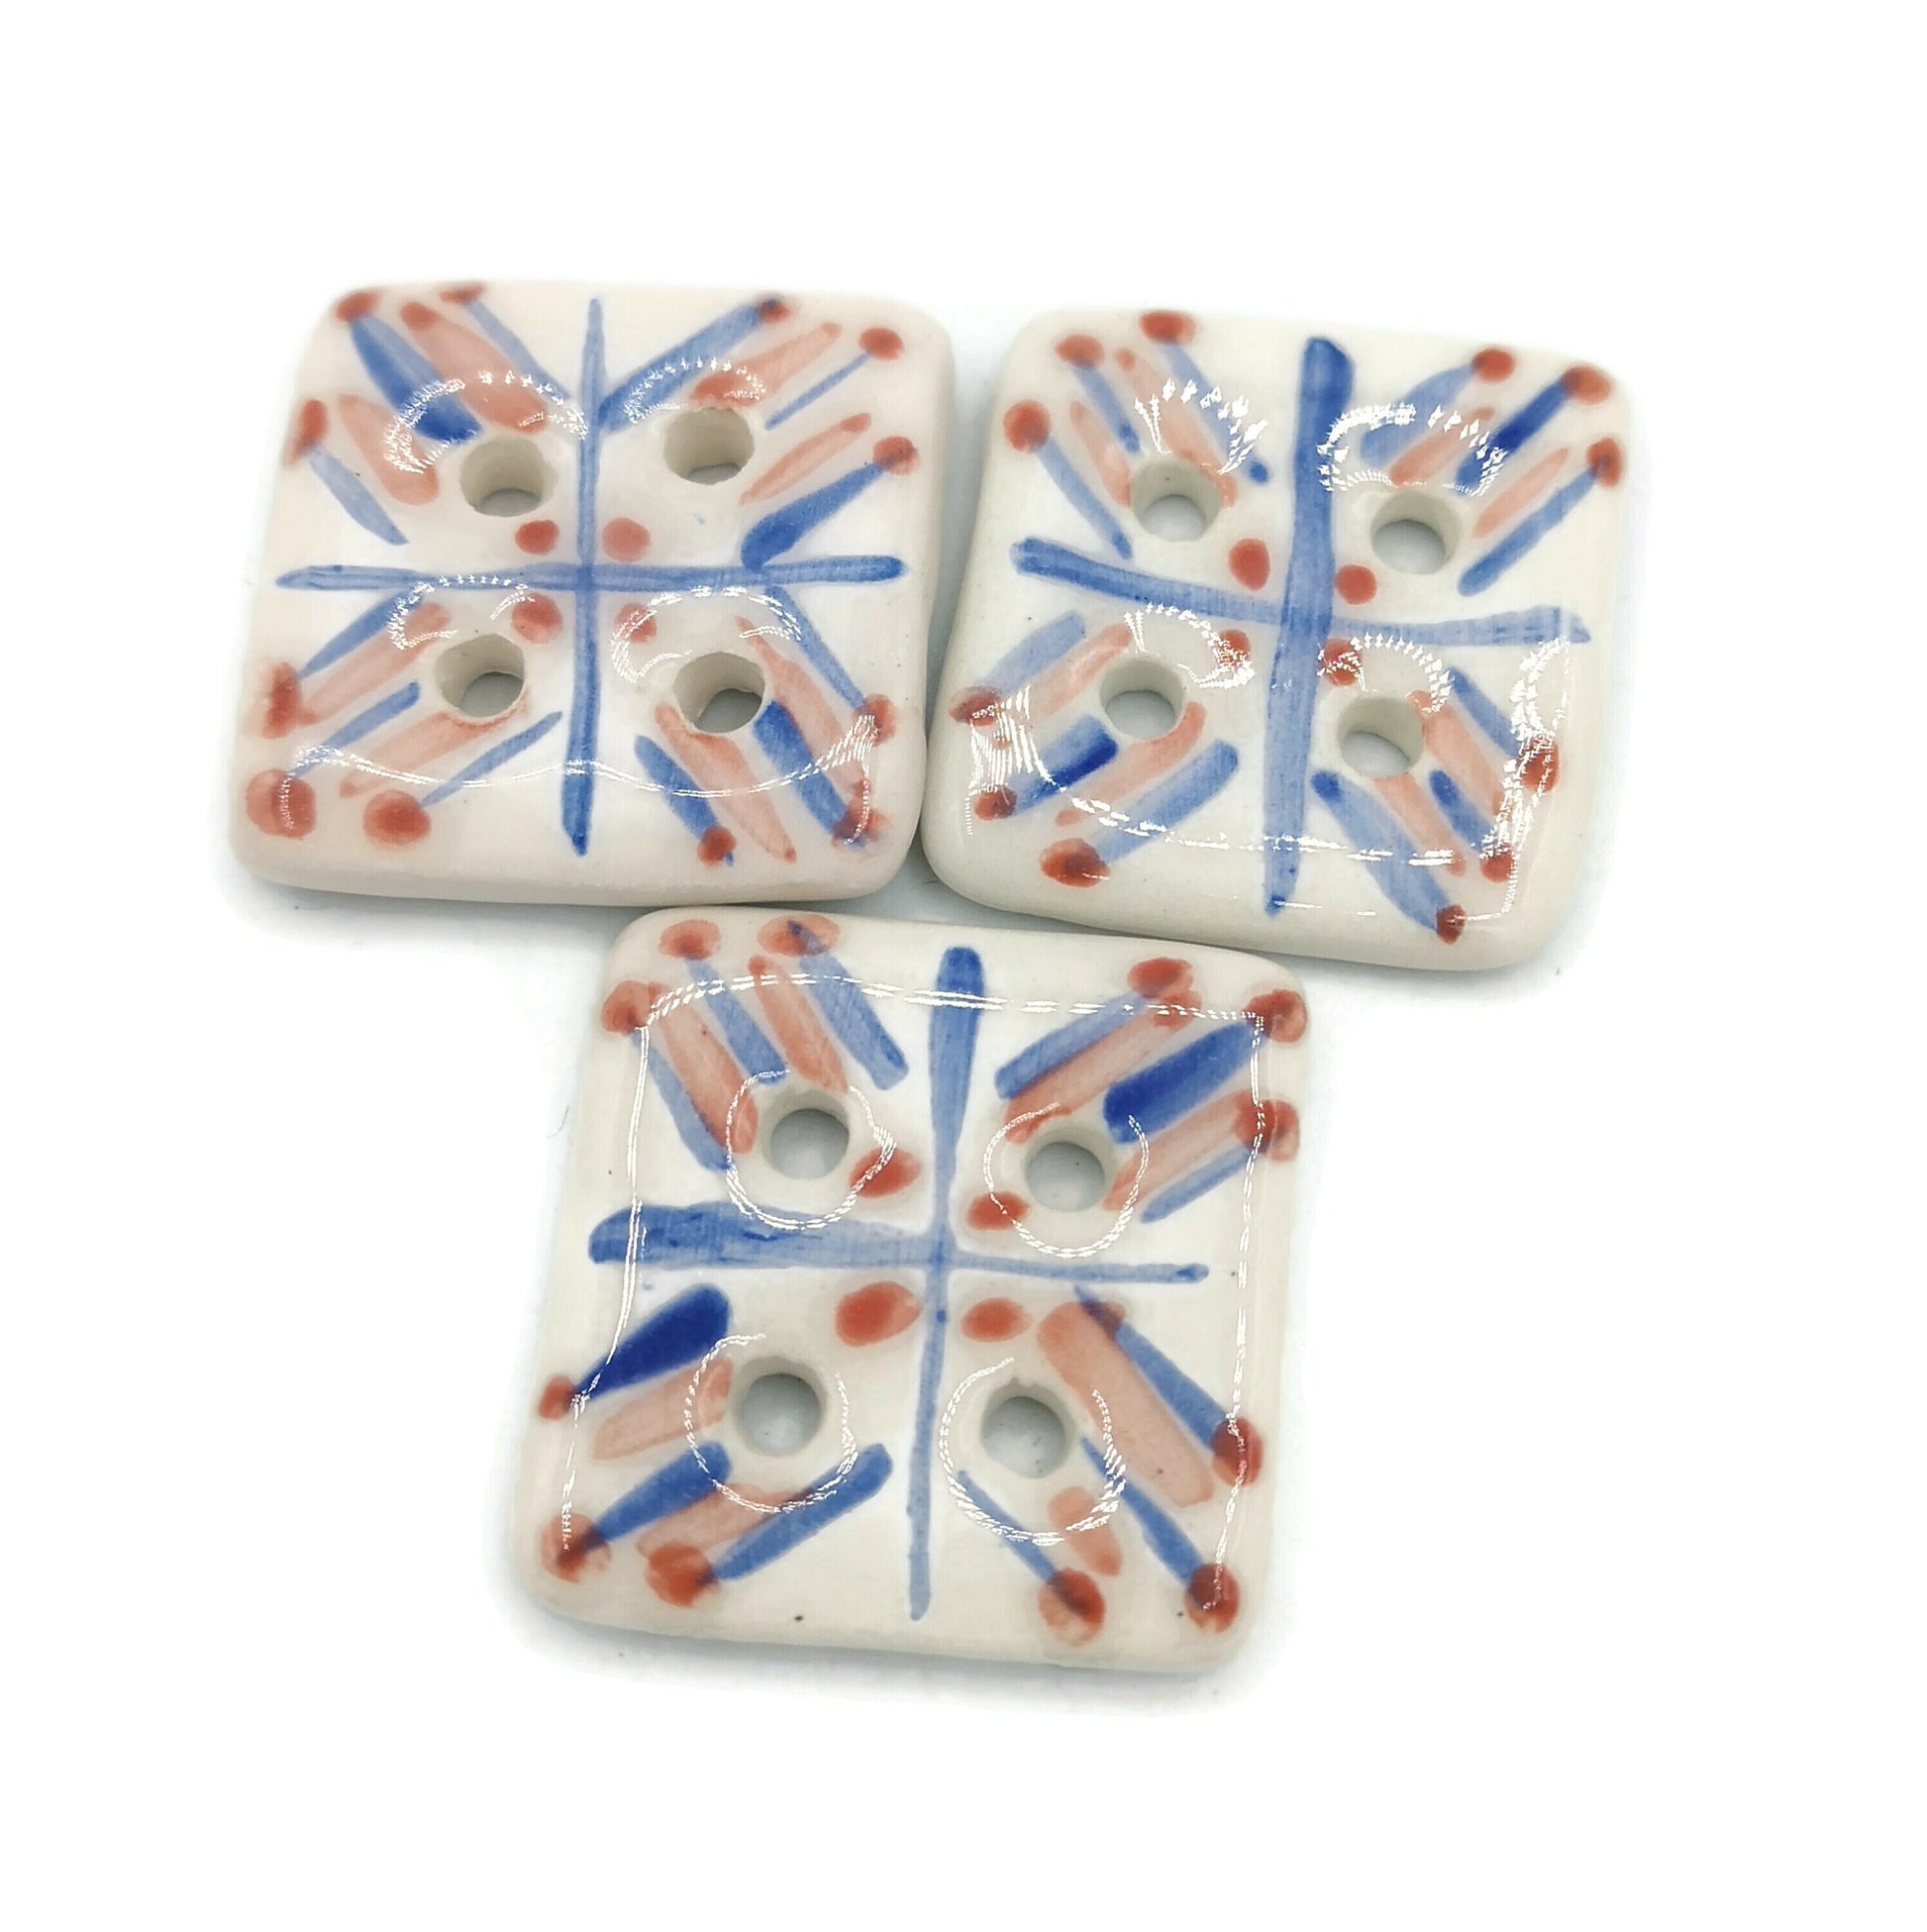 3Pcs 30mm Extra Large Buttons Square Shaped Fancy Clay Buttons, Handmade Ceramic Jacket Cute Buttons For Blouse, Hand Painted Coat Buttons - Ceramica Ana Rafael